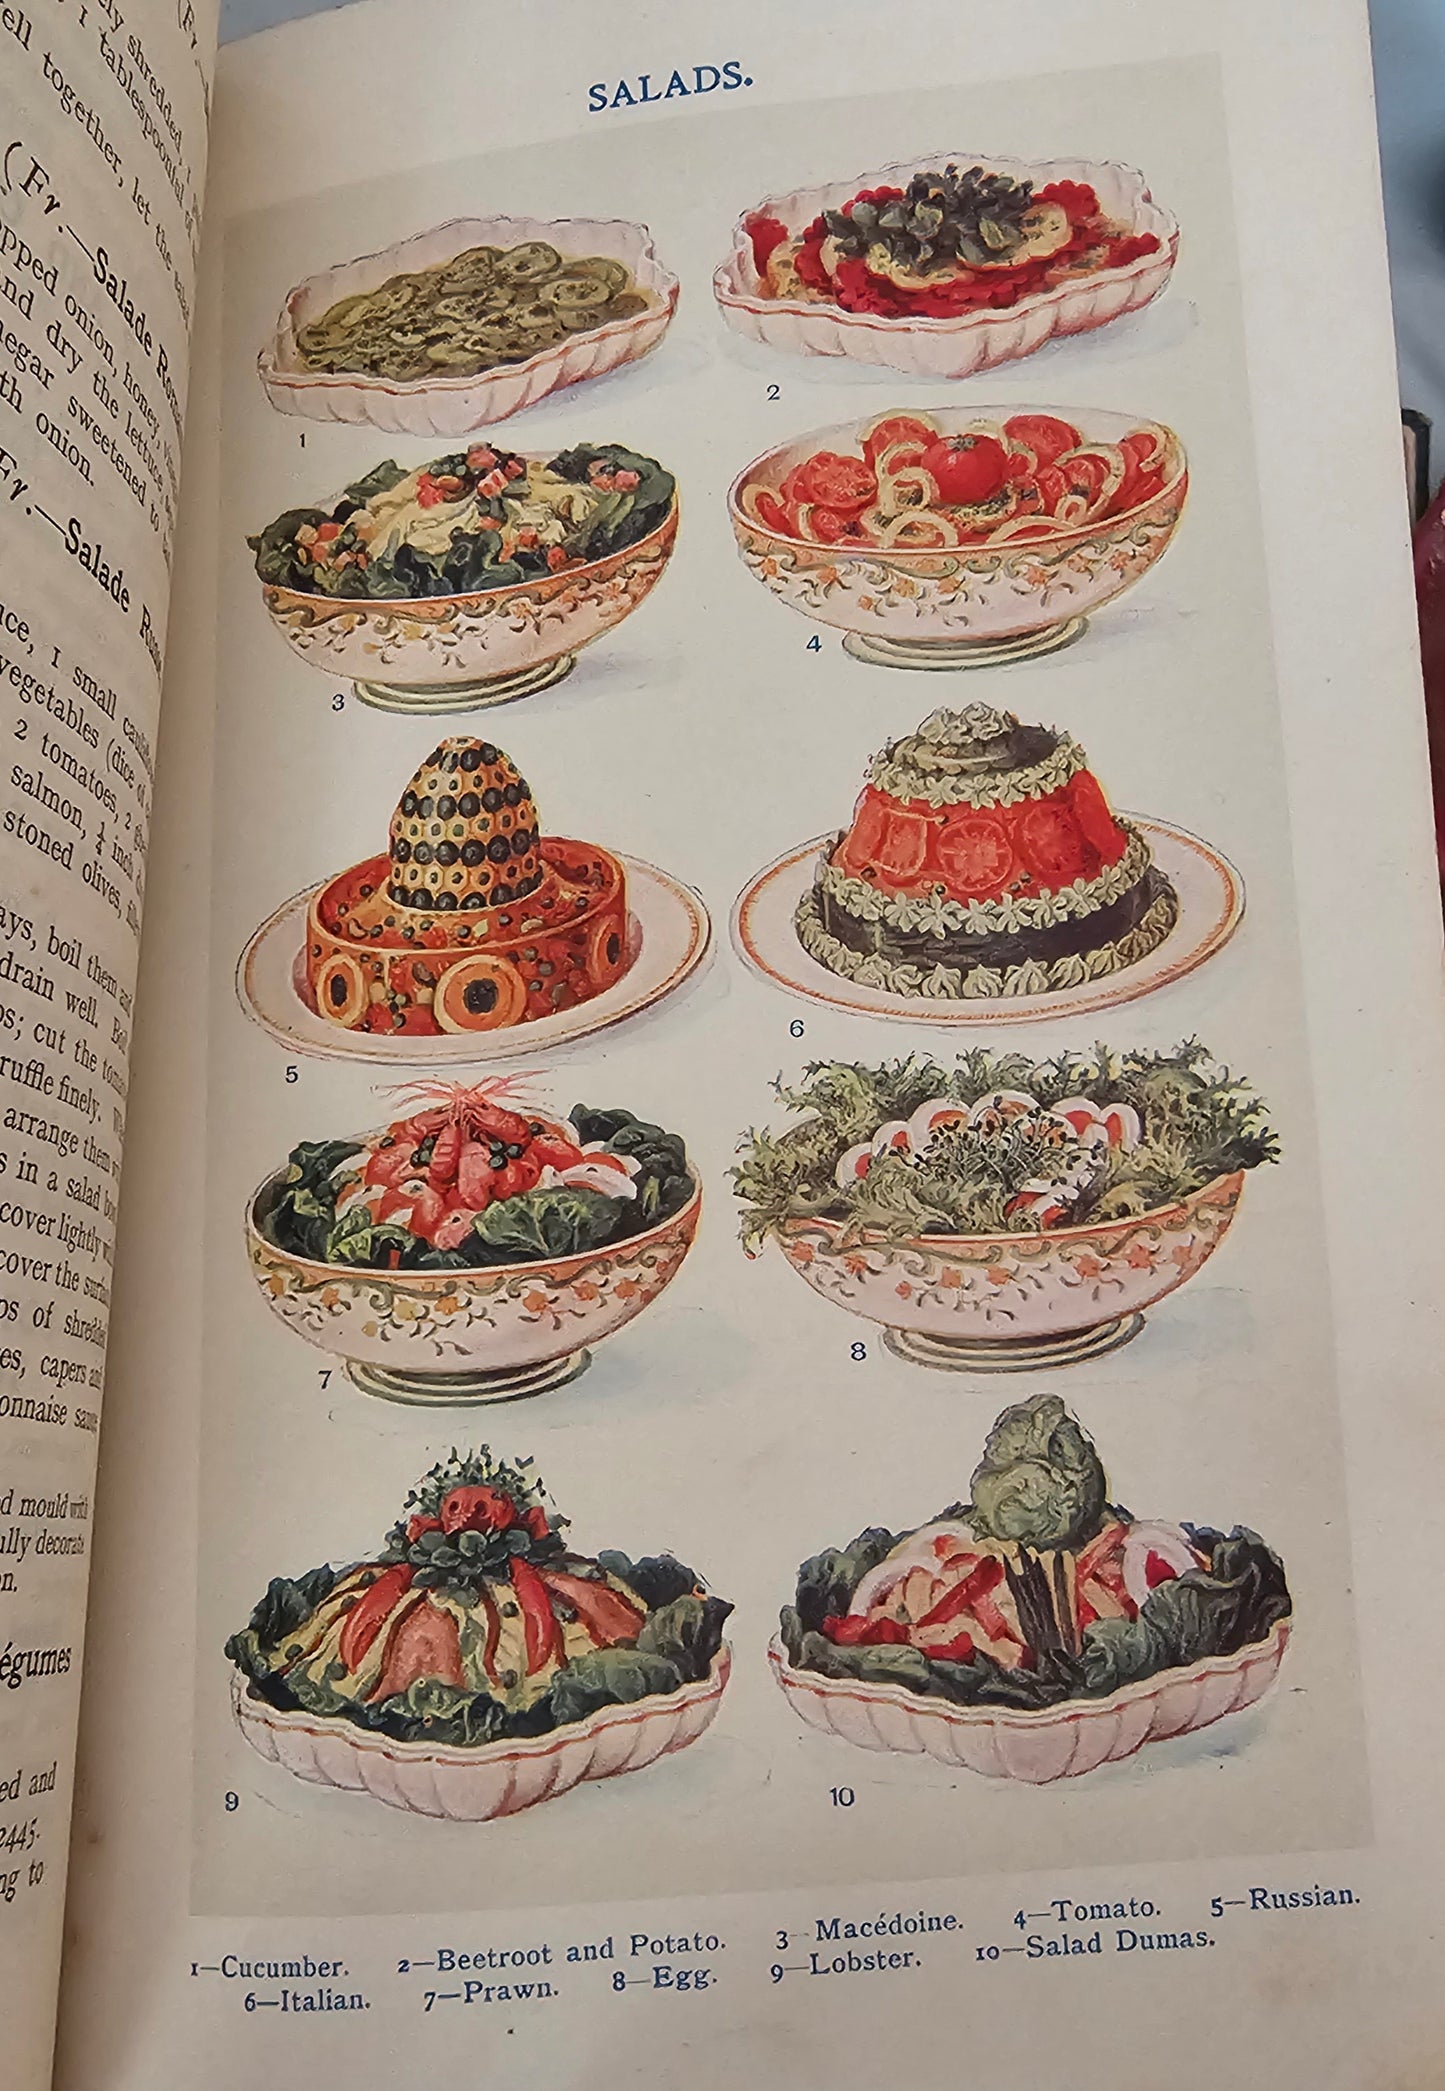 1913 The Book of Household Management by Mrs Isabella Beeton / Ward Lock & Co., London / 32 Colour Plates and Nearly 700 Illustrations